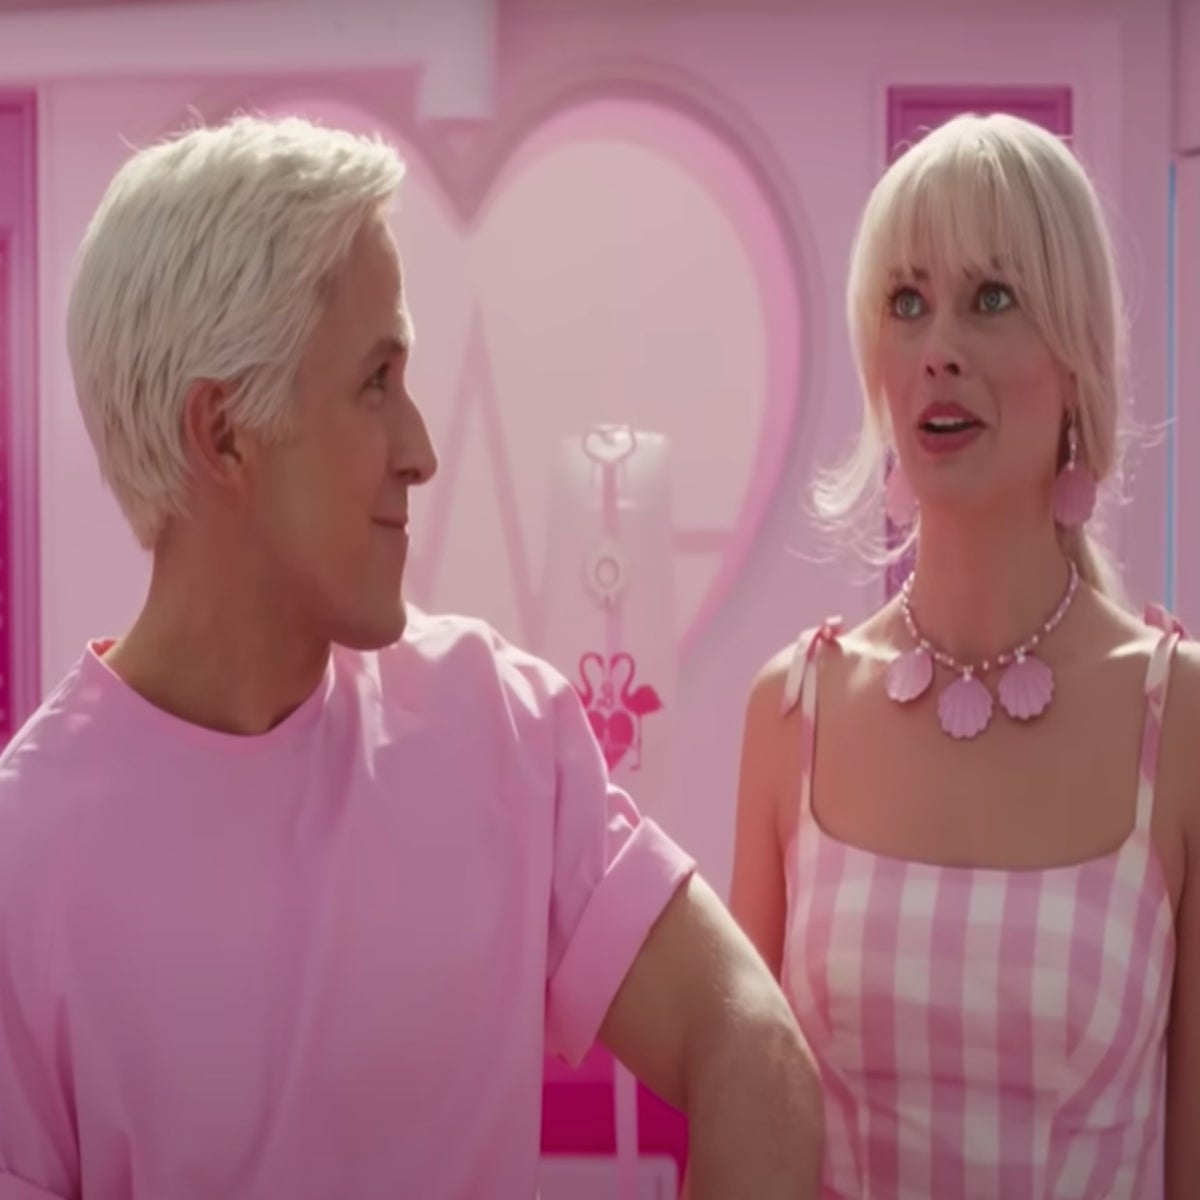 Barbie debuts on Rotten Tomatoes with impressive 88% score